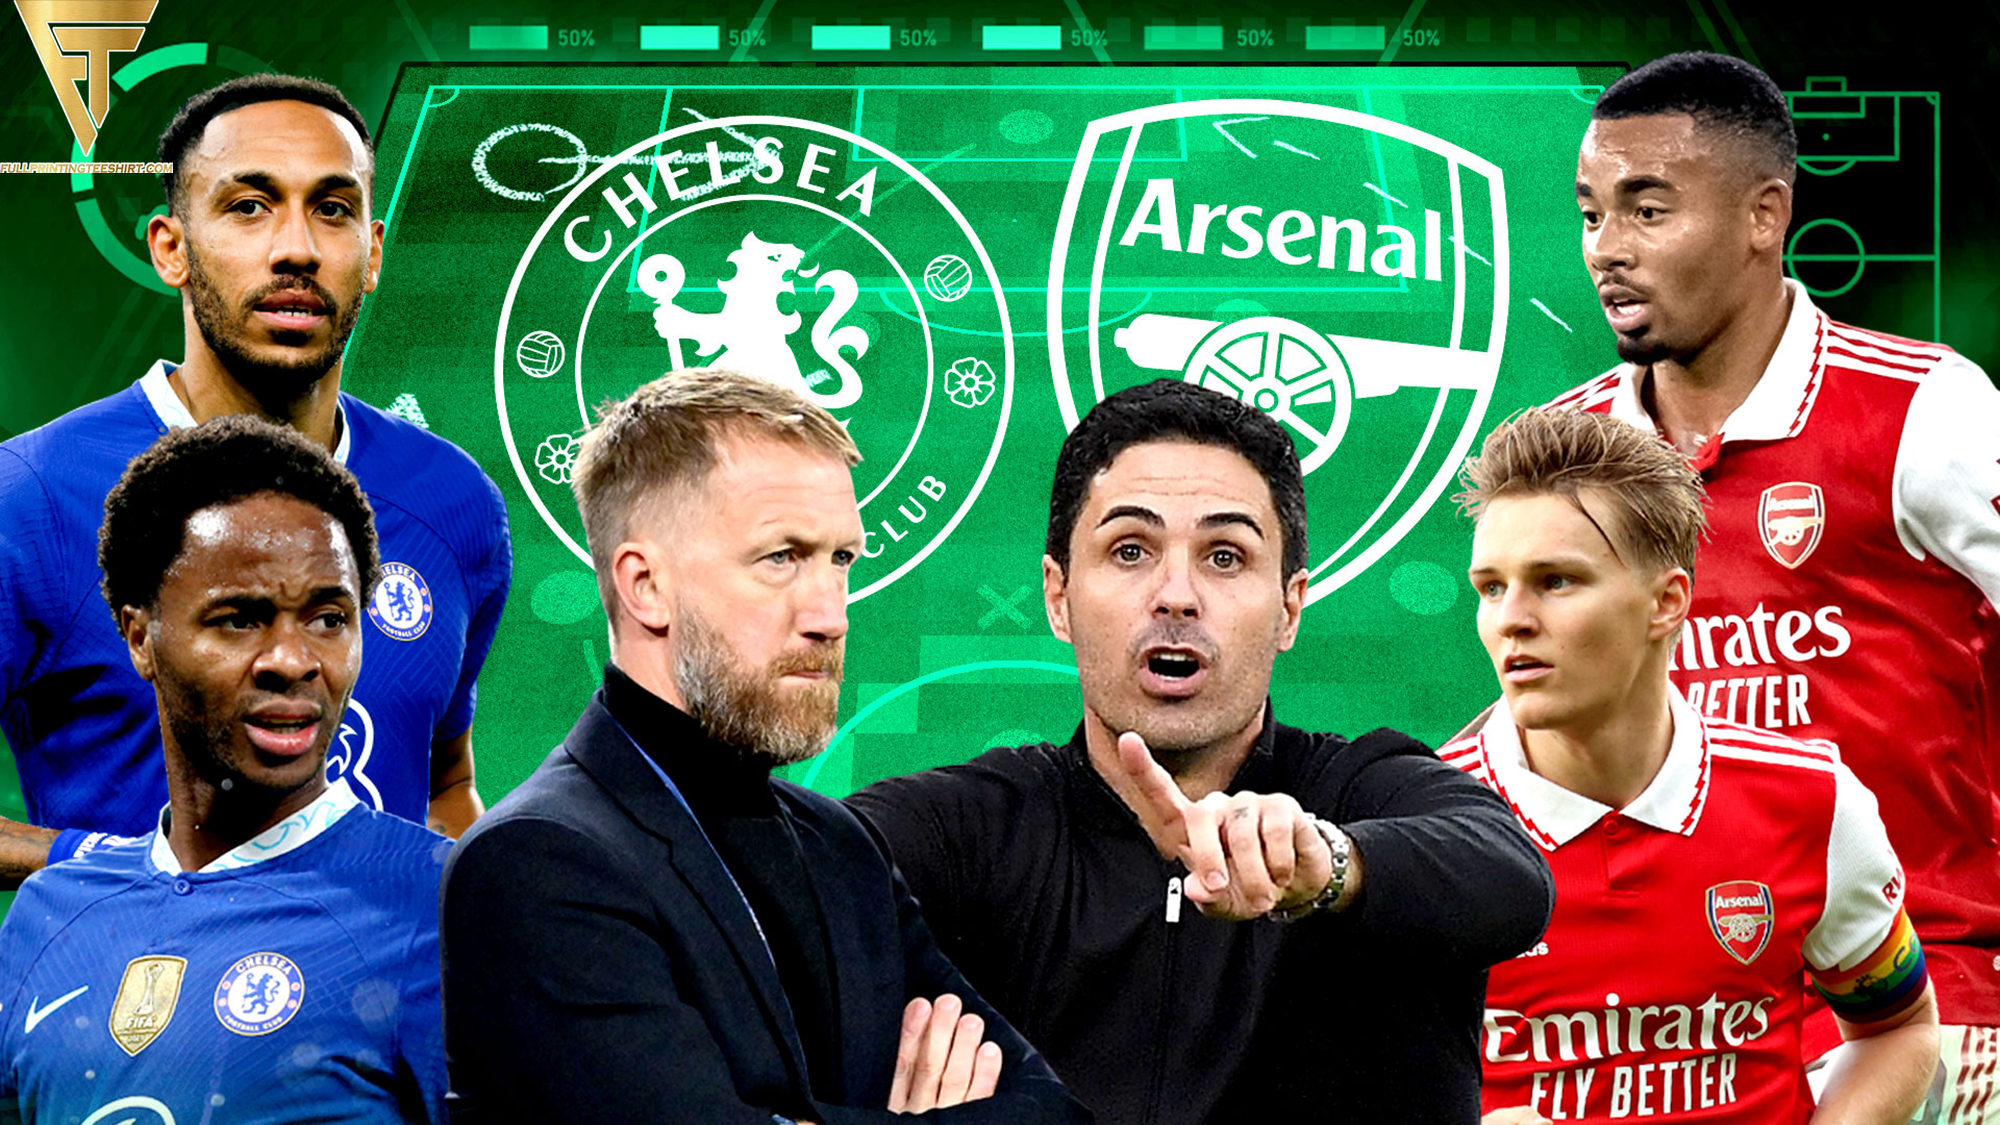 Chelsea vs. Arsenal A Thrilling Encounter Lights Up London as Blues and Gunners Battle for Glory